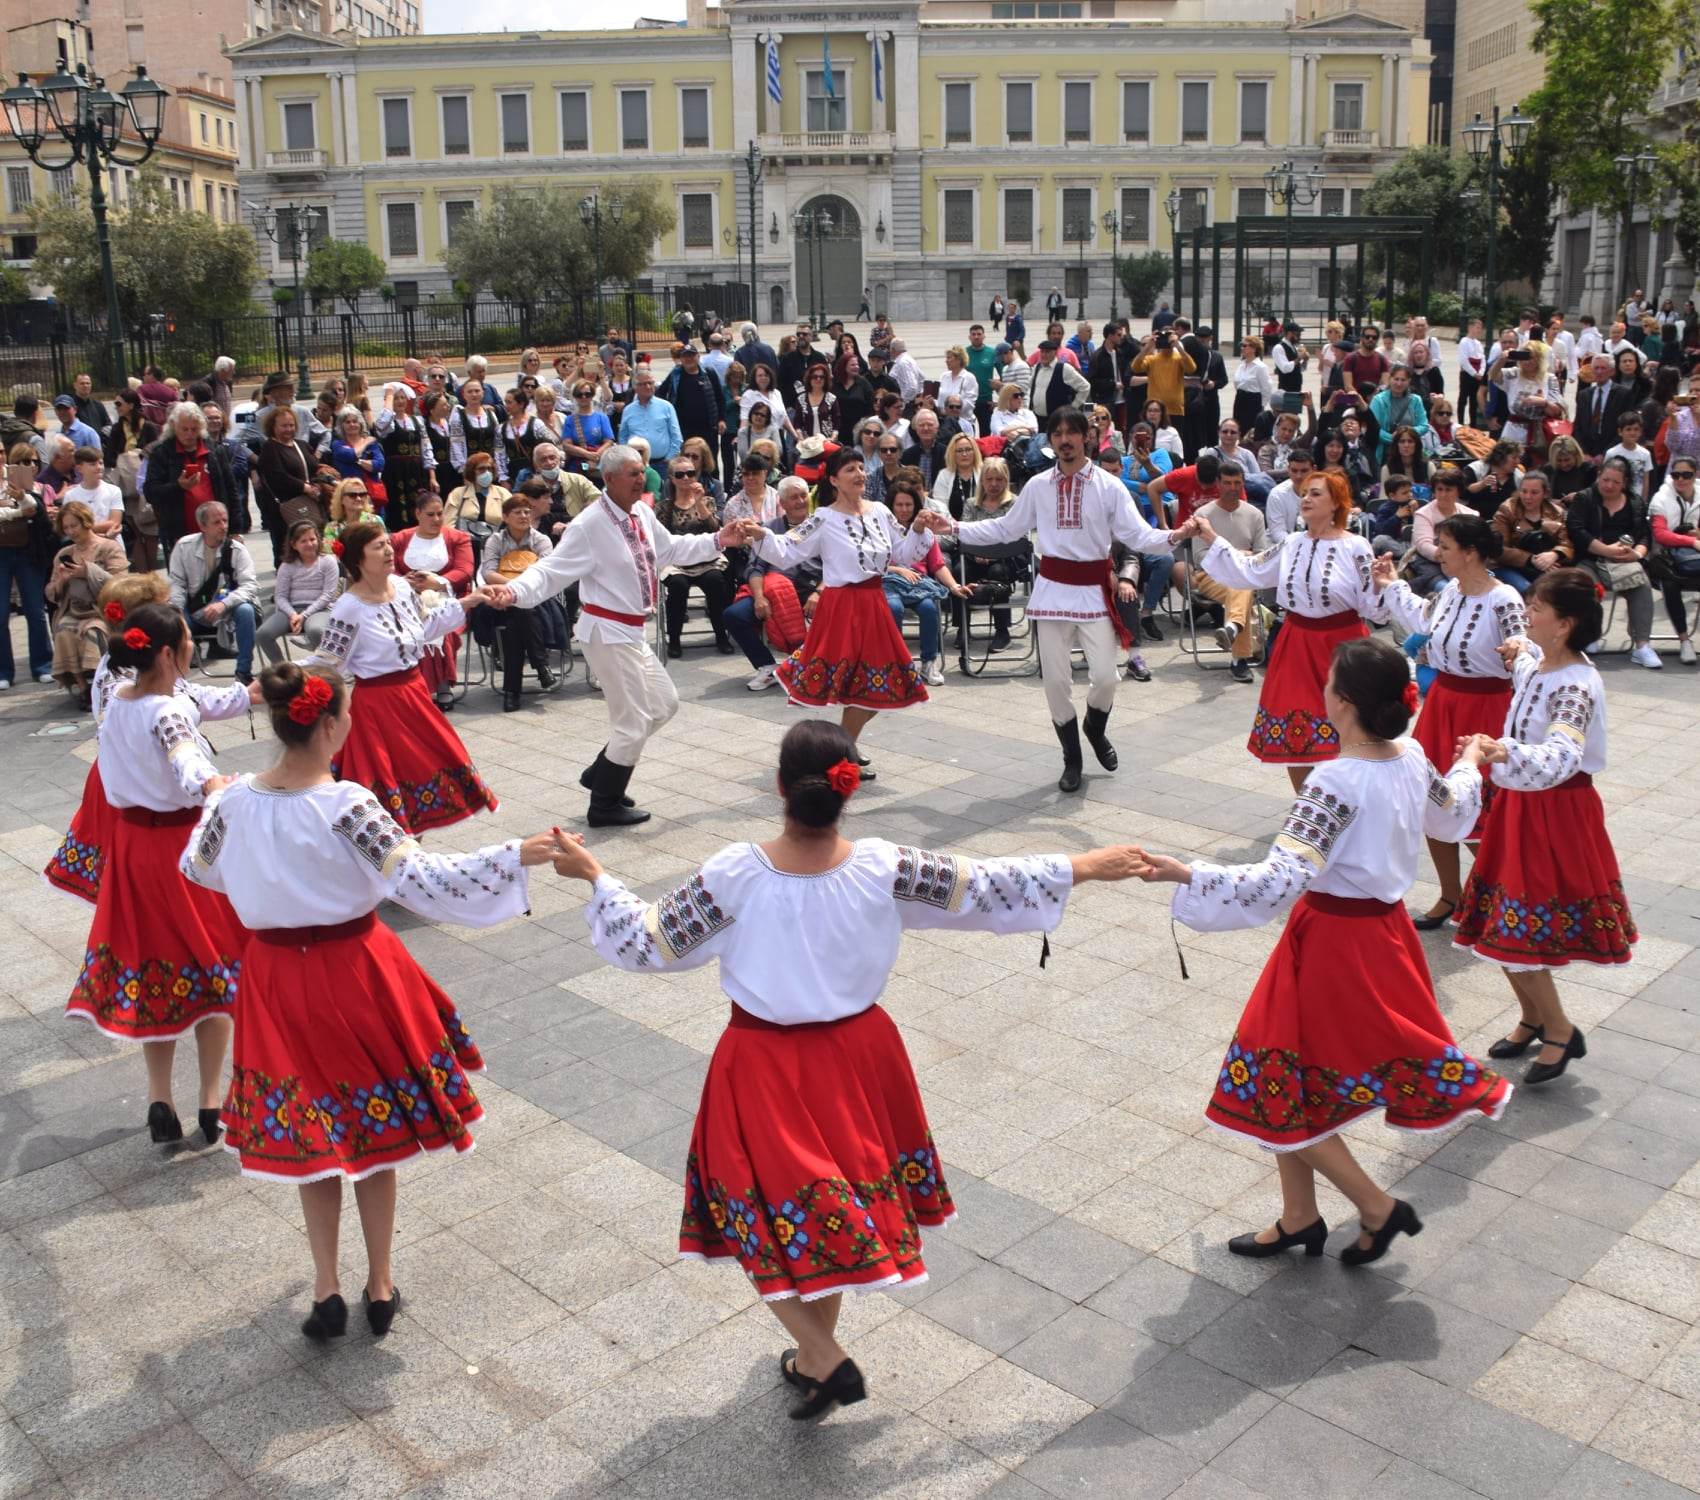 International Dance Day, marked through dance by the diaspora from Greece